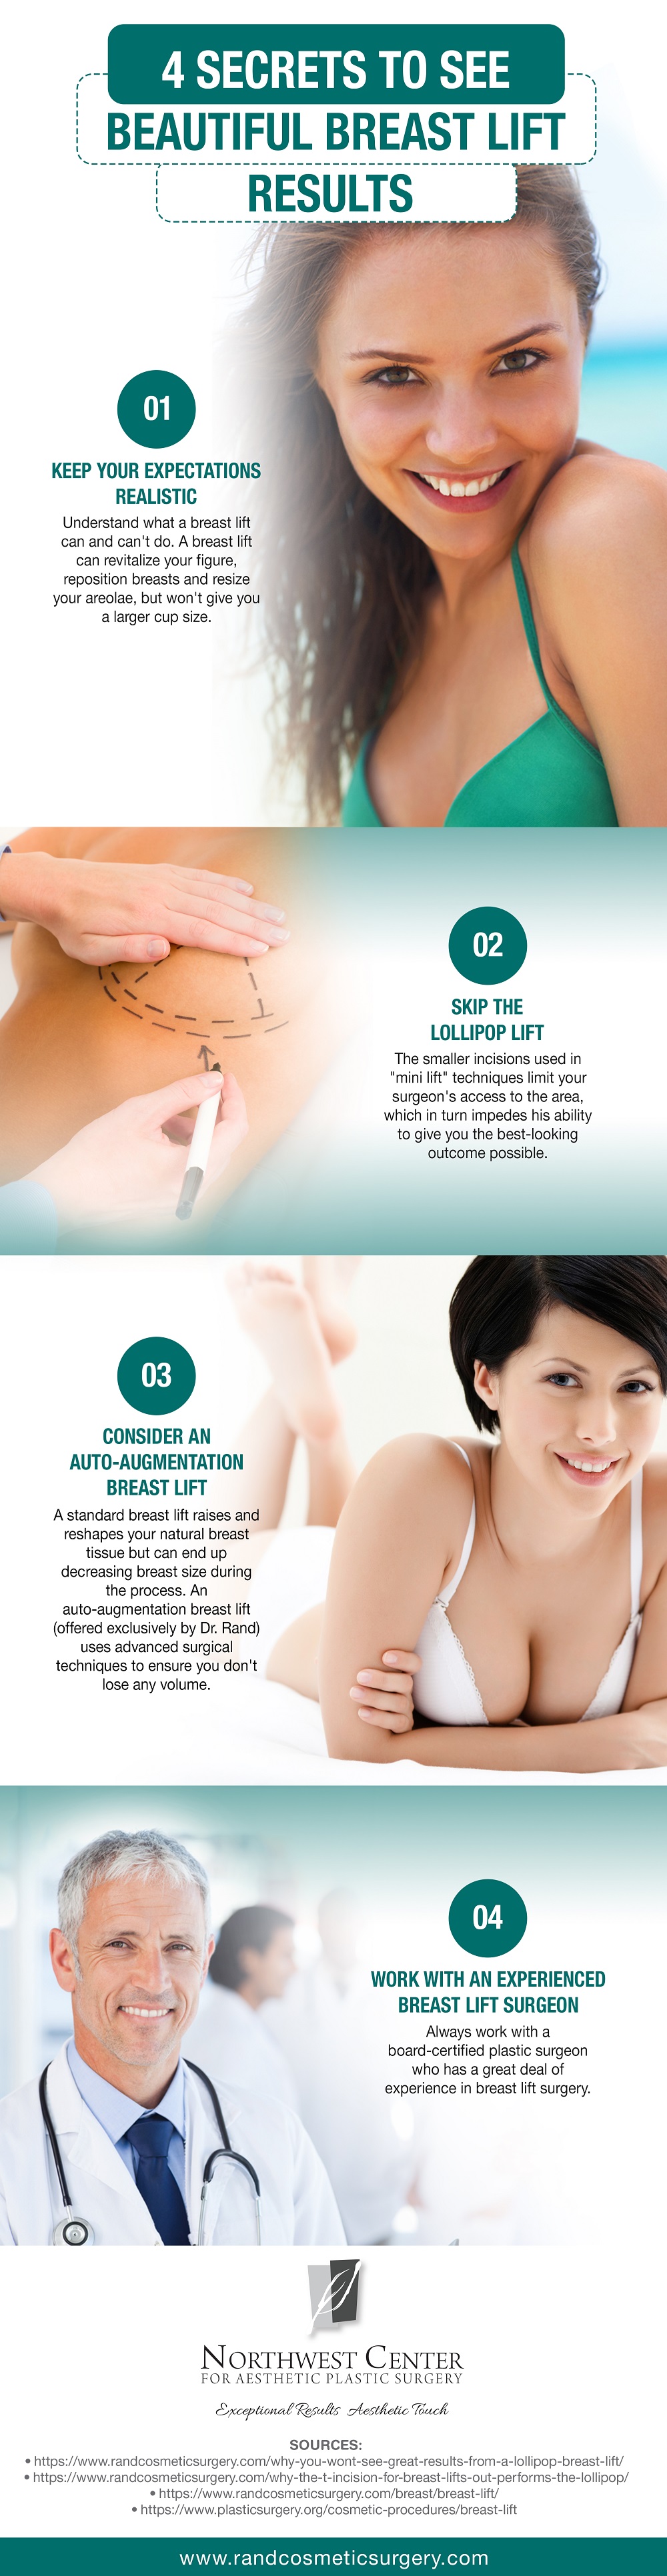 4 Secrets to See Beautiful Breast Lift Results [Infographic